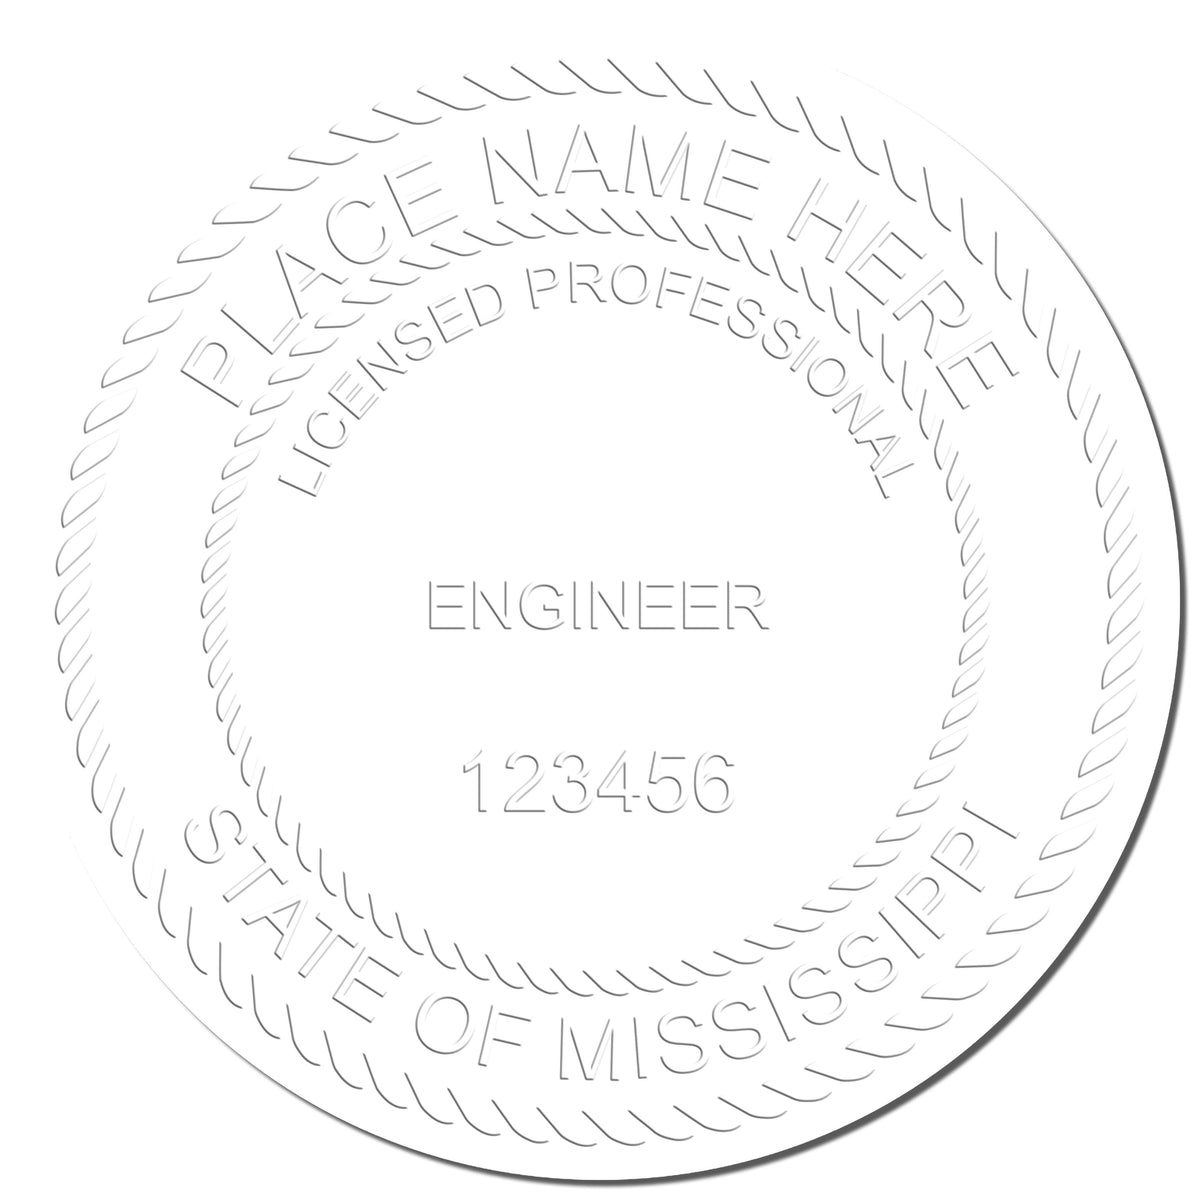 Another Example of a stamped impression of the Mississippi Engineer Desk Seal on a piece of office paper.